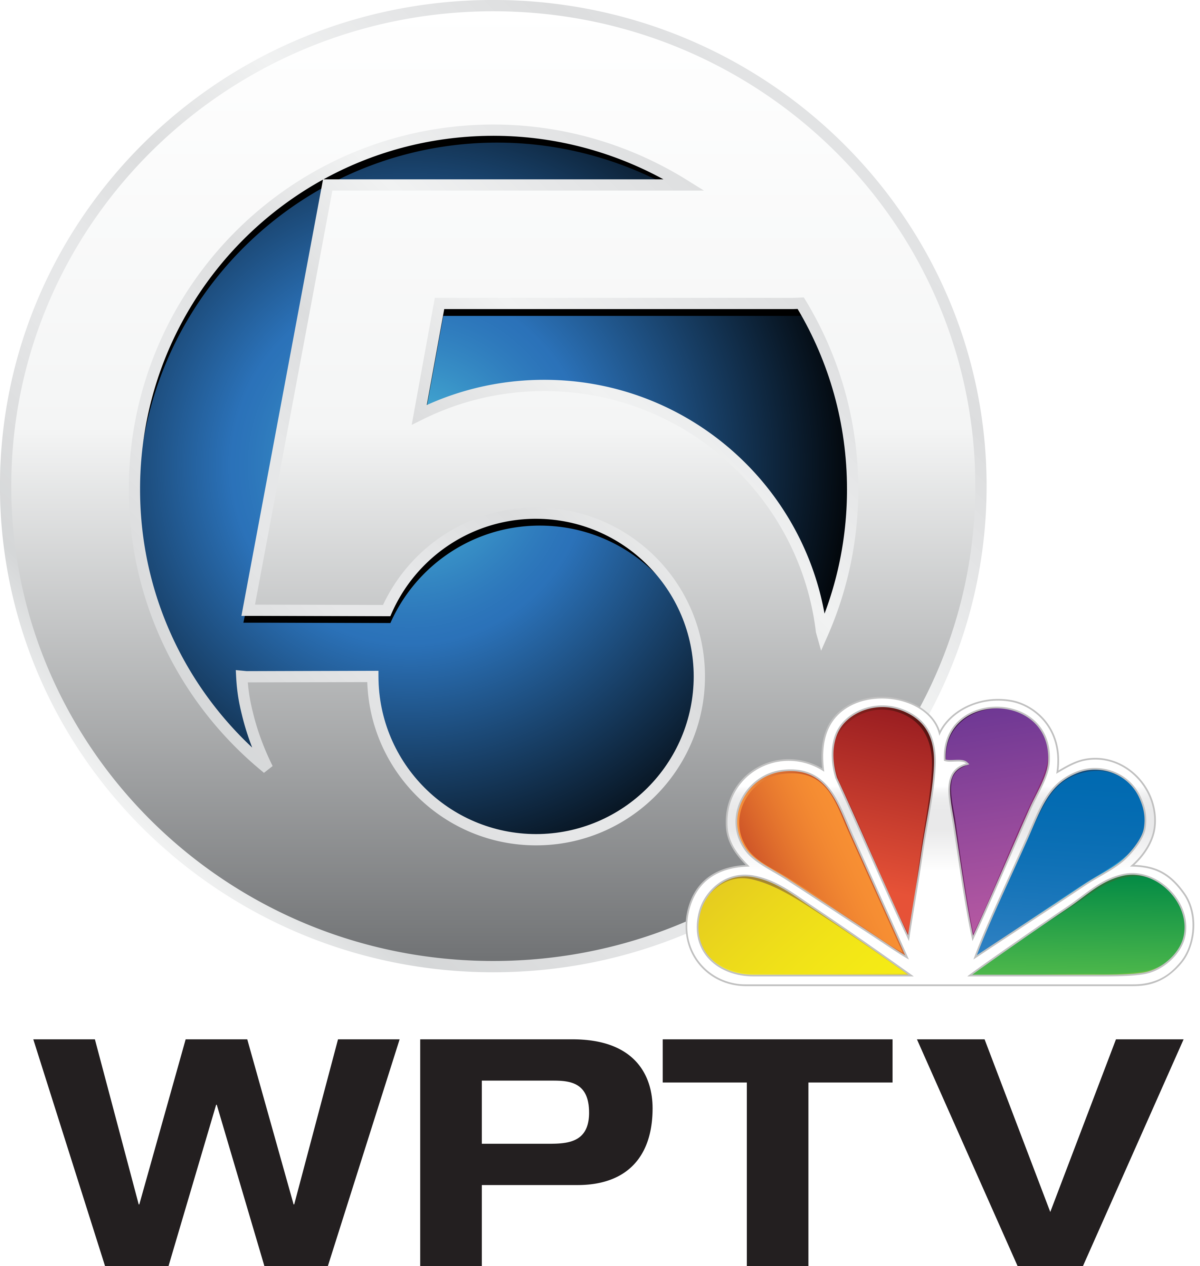 Venture Construction Group of Florida Featured on WPTV Channel 5 NBC West Palm Beach to Discuss Boca Raton Fundraising Event